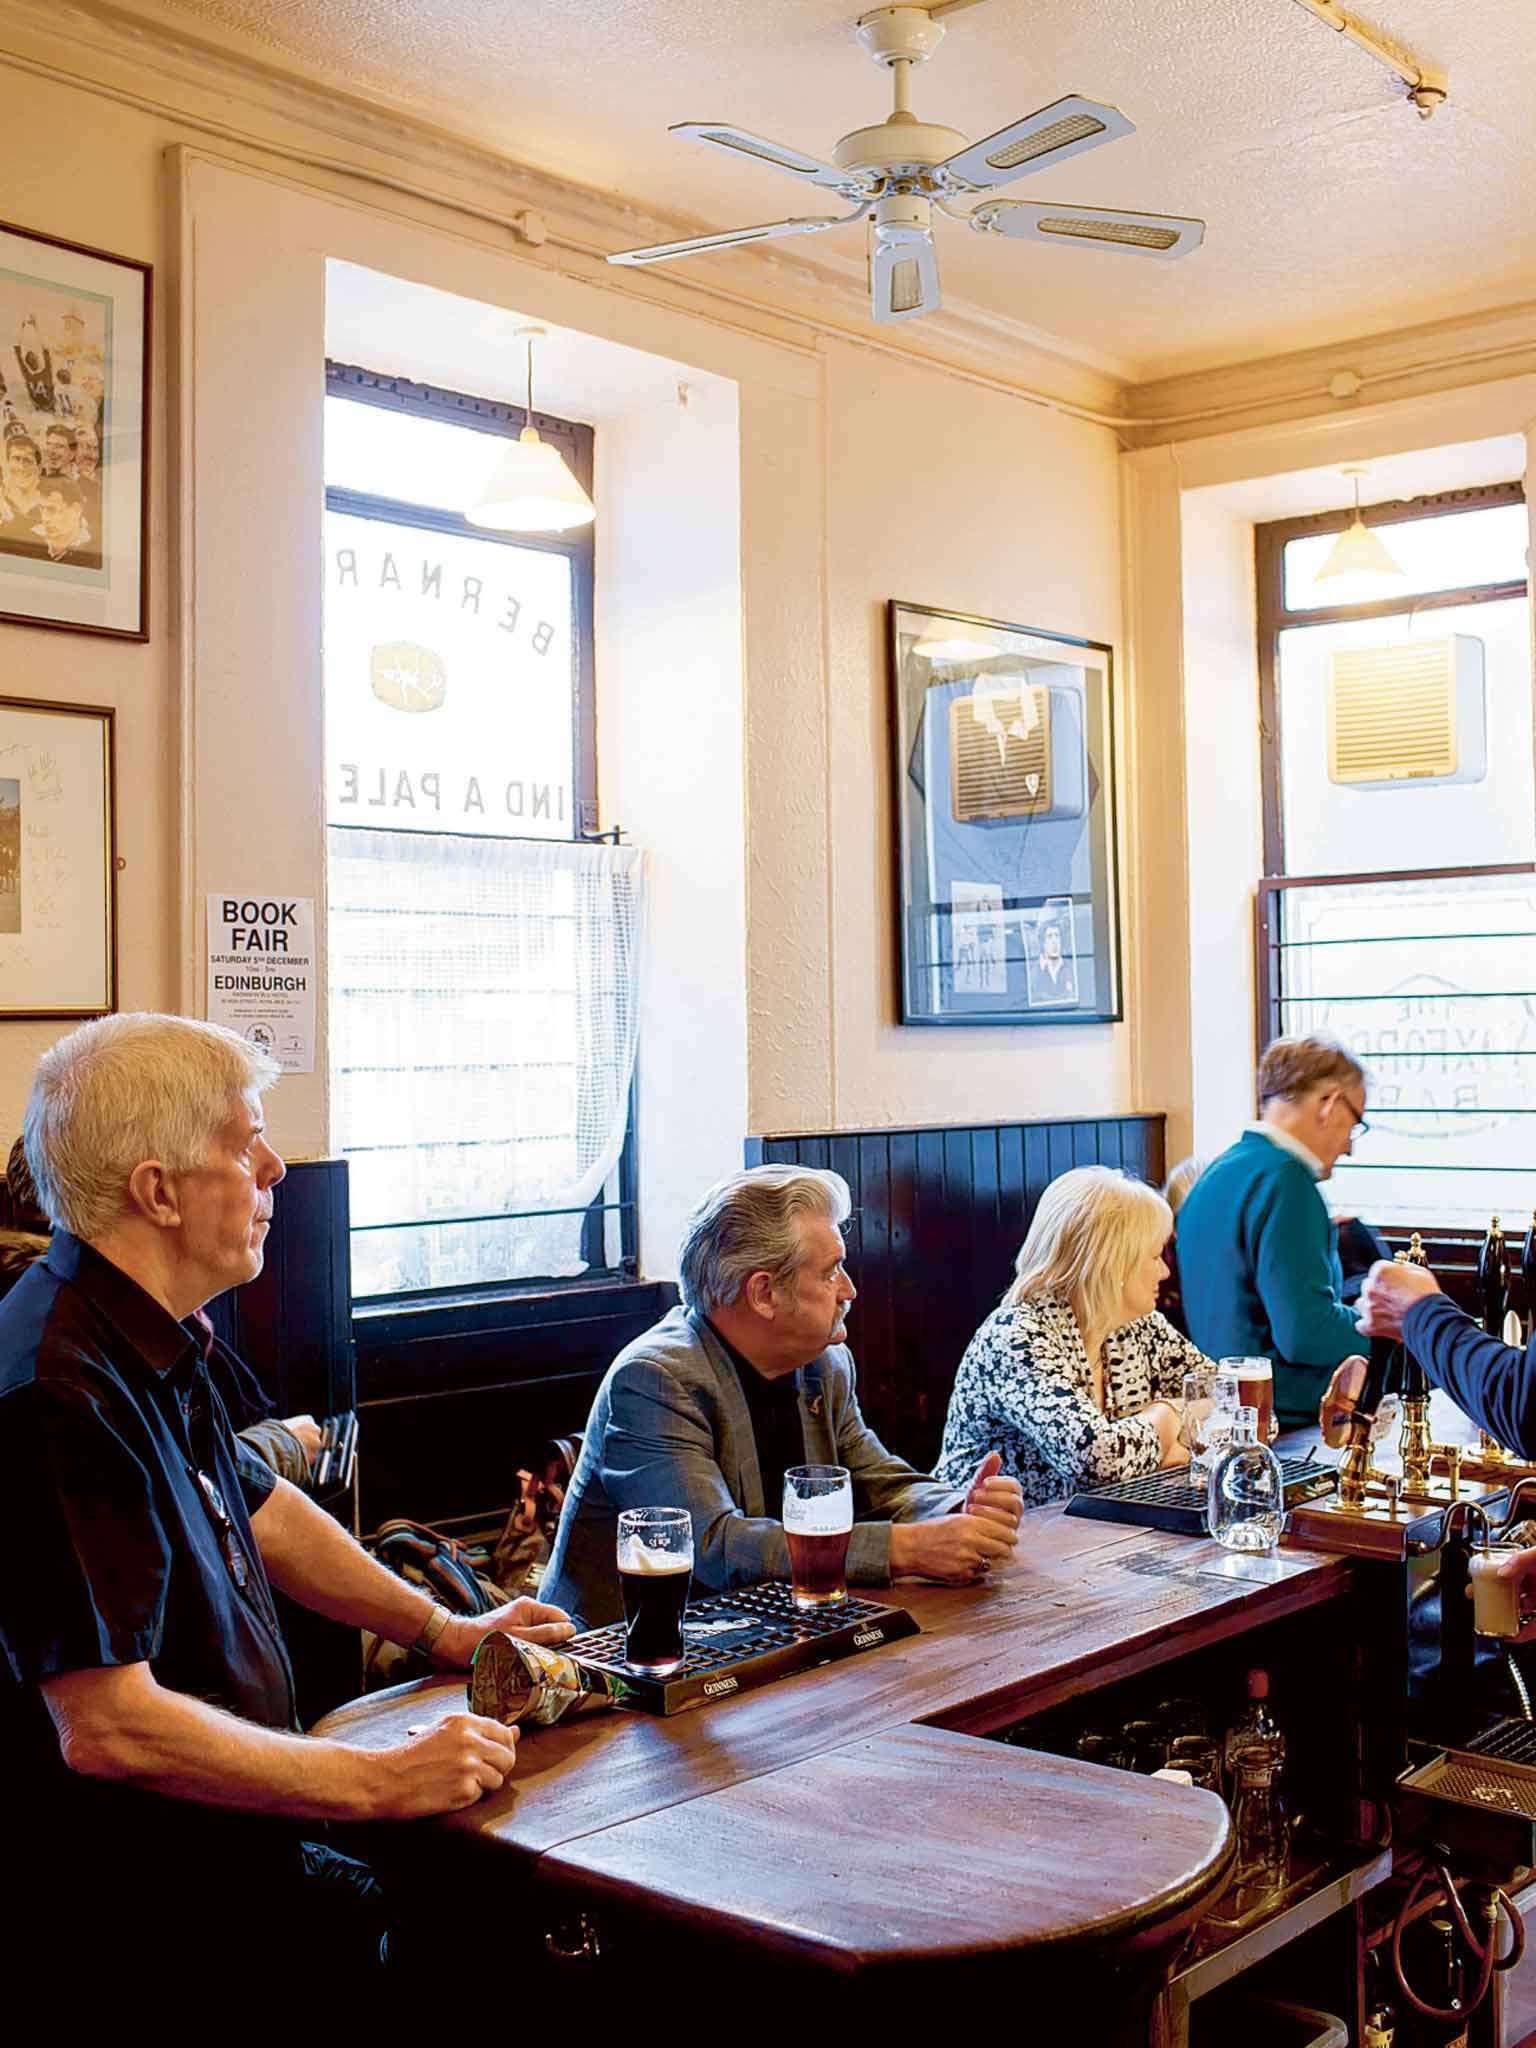 Just good chat and peaceful nooks: the Oxford Bar in Edinburgh